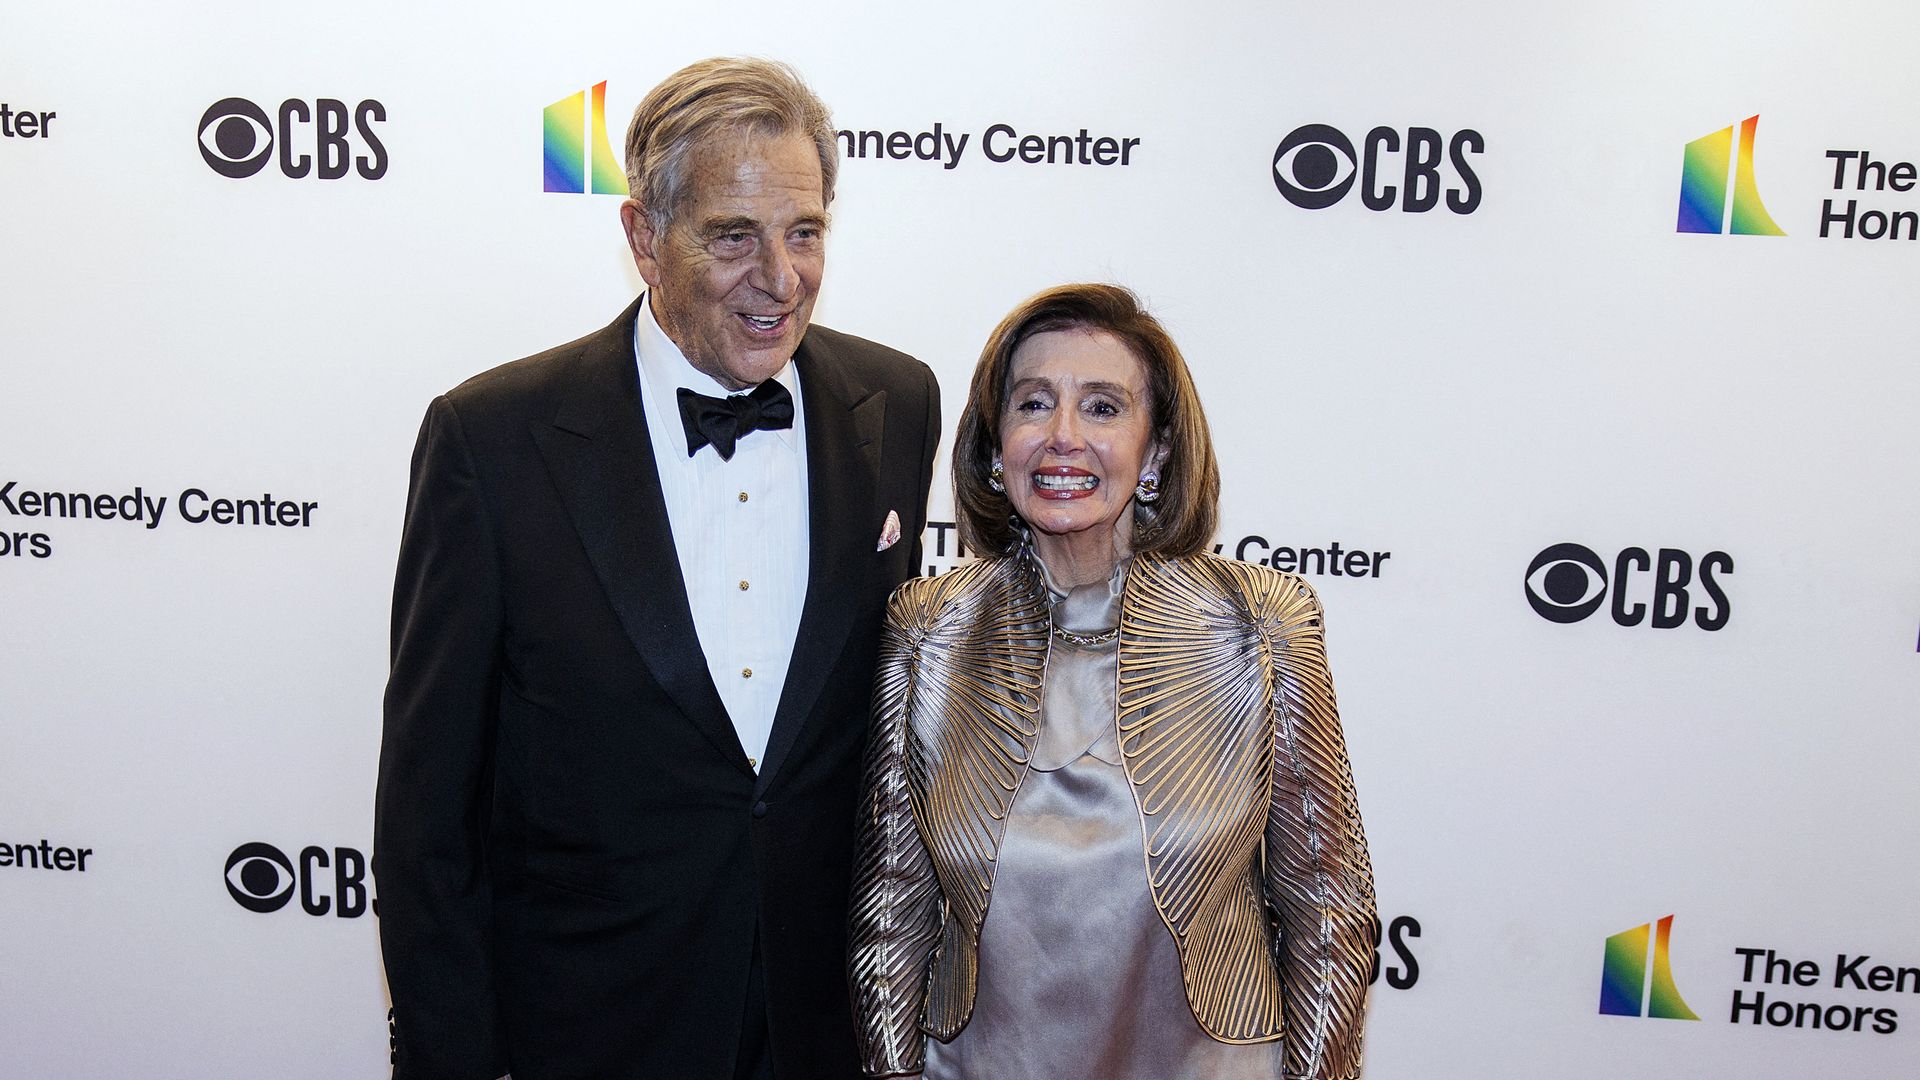 House Speaker Nancy Pelosi wearing a gold outfit and her husband Paul Pelosi wearing a Tuxedo in front of a wall bearing the CBS and Kennedy Center logos.